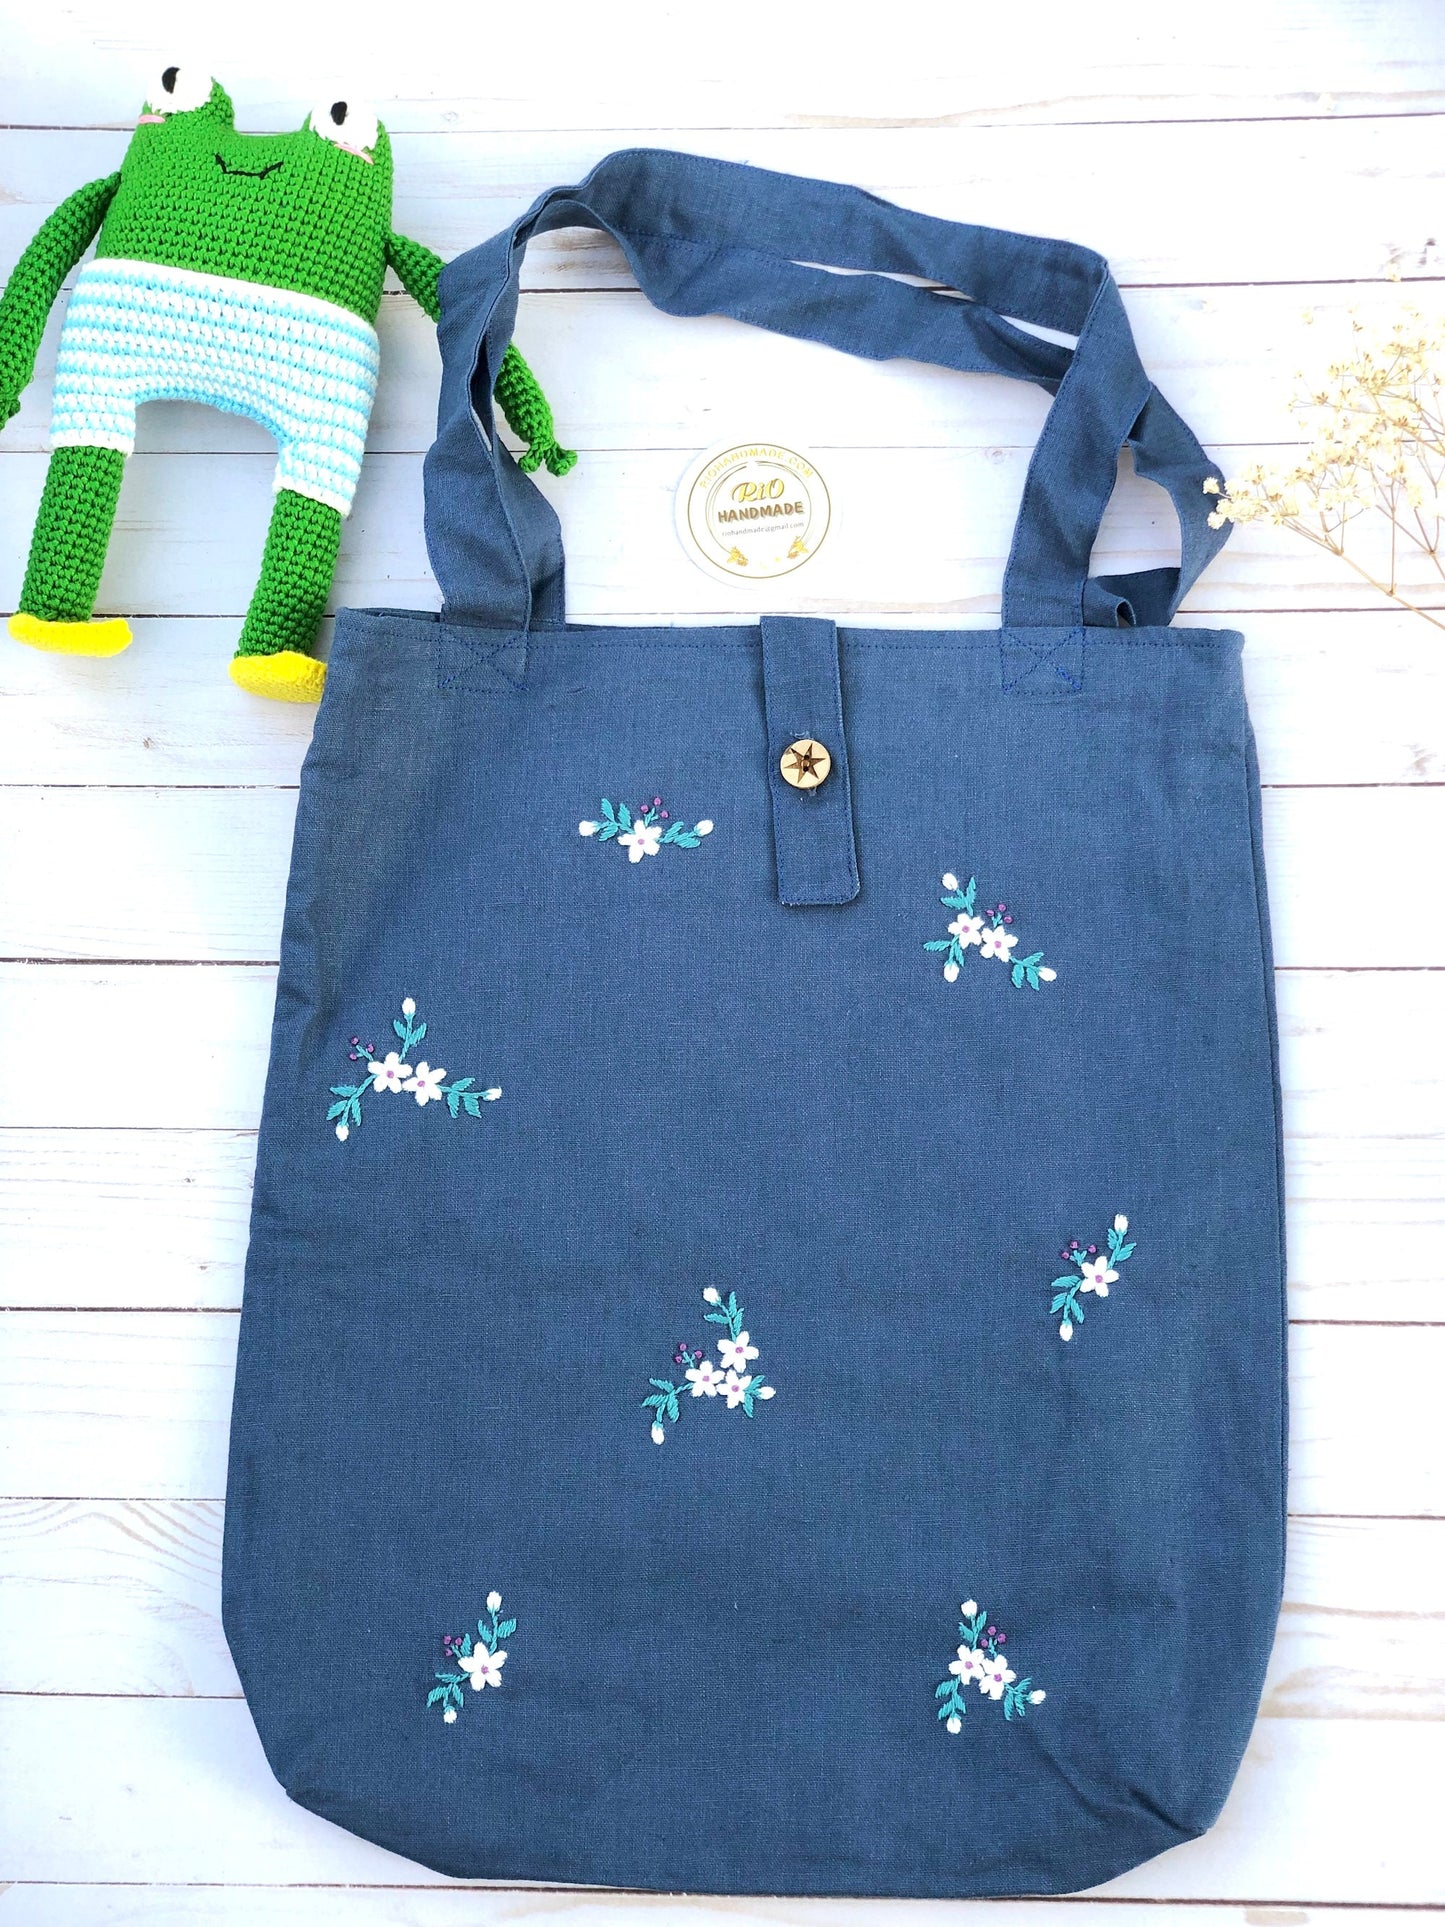 Handmade Linen Embroidery Floral Tote Bag Wild Flowers